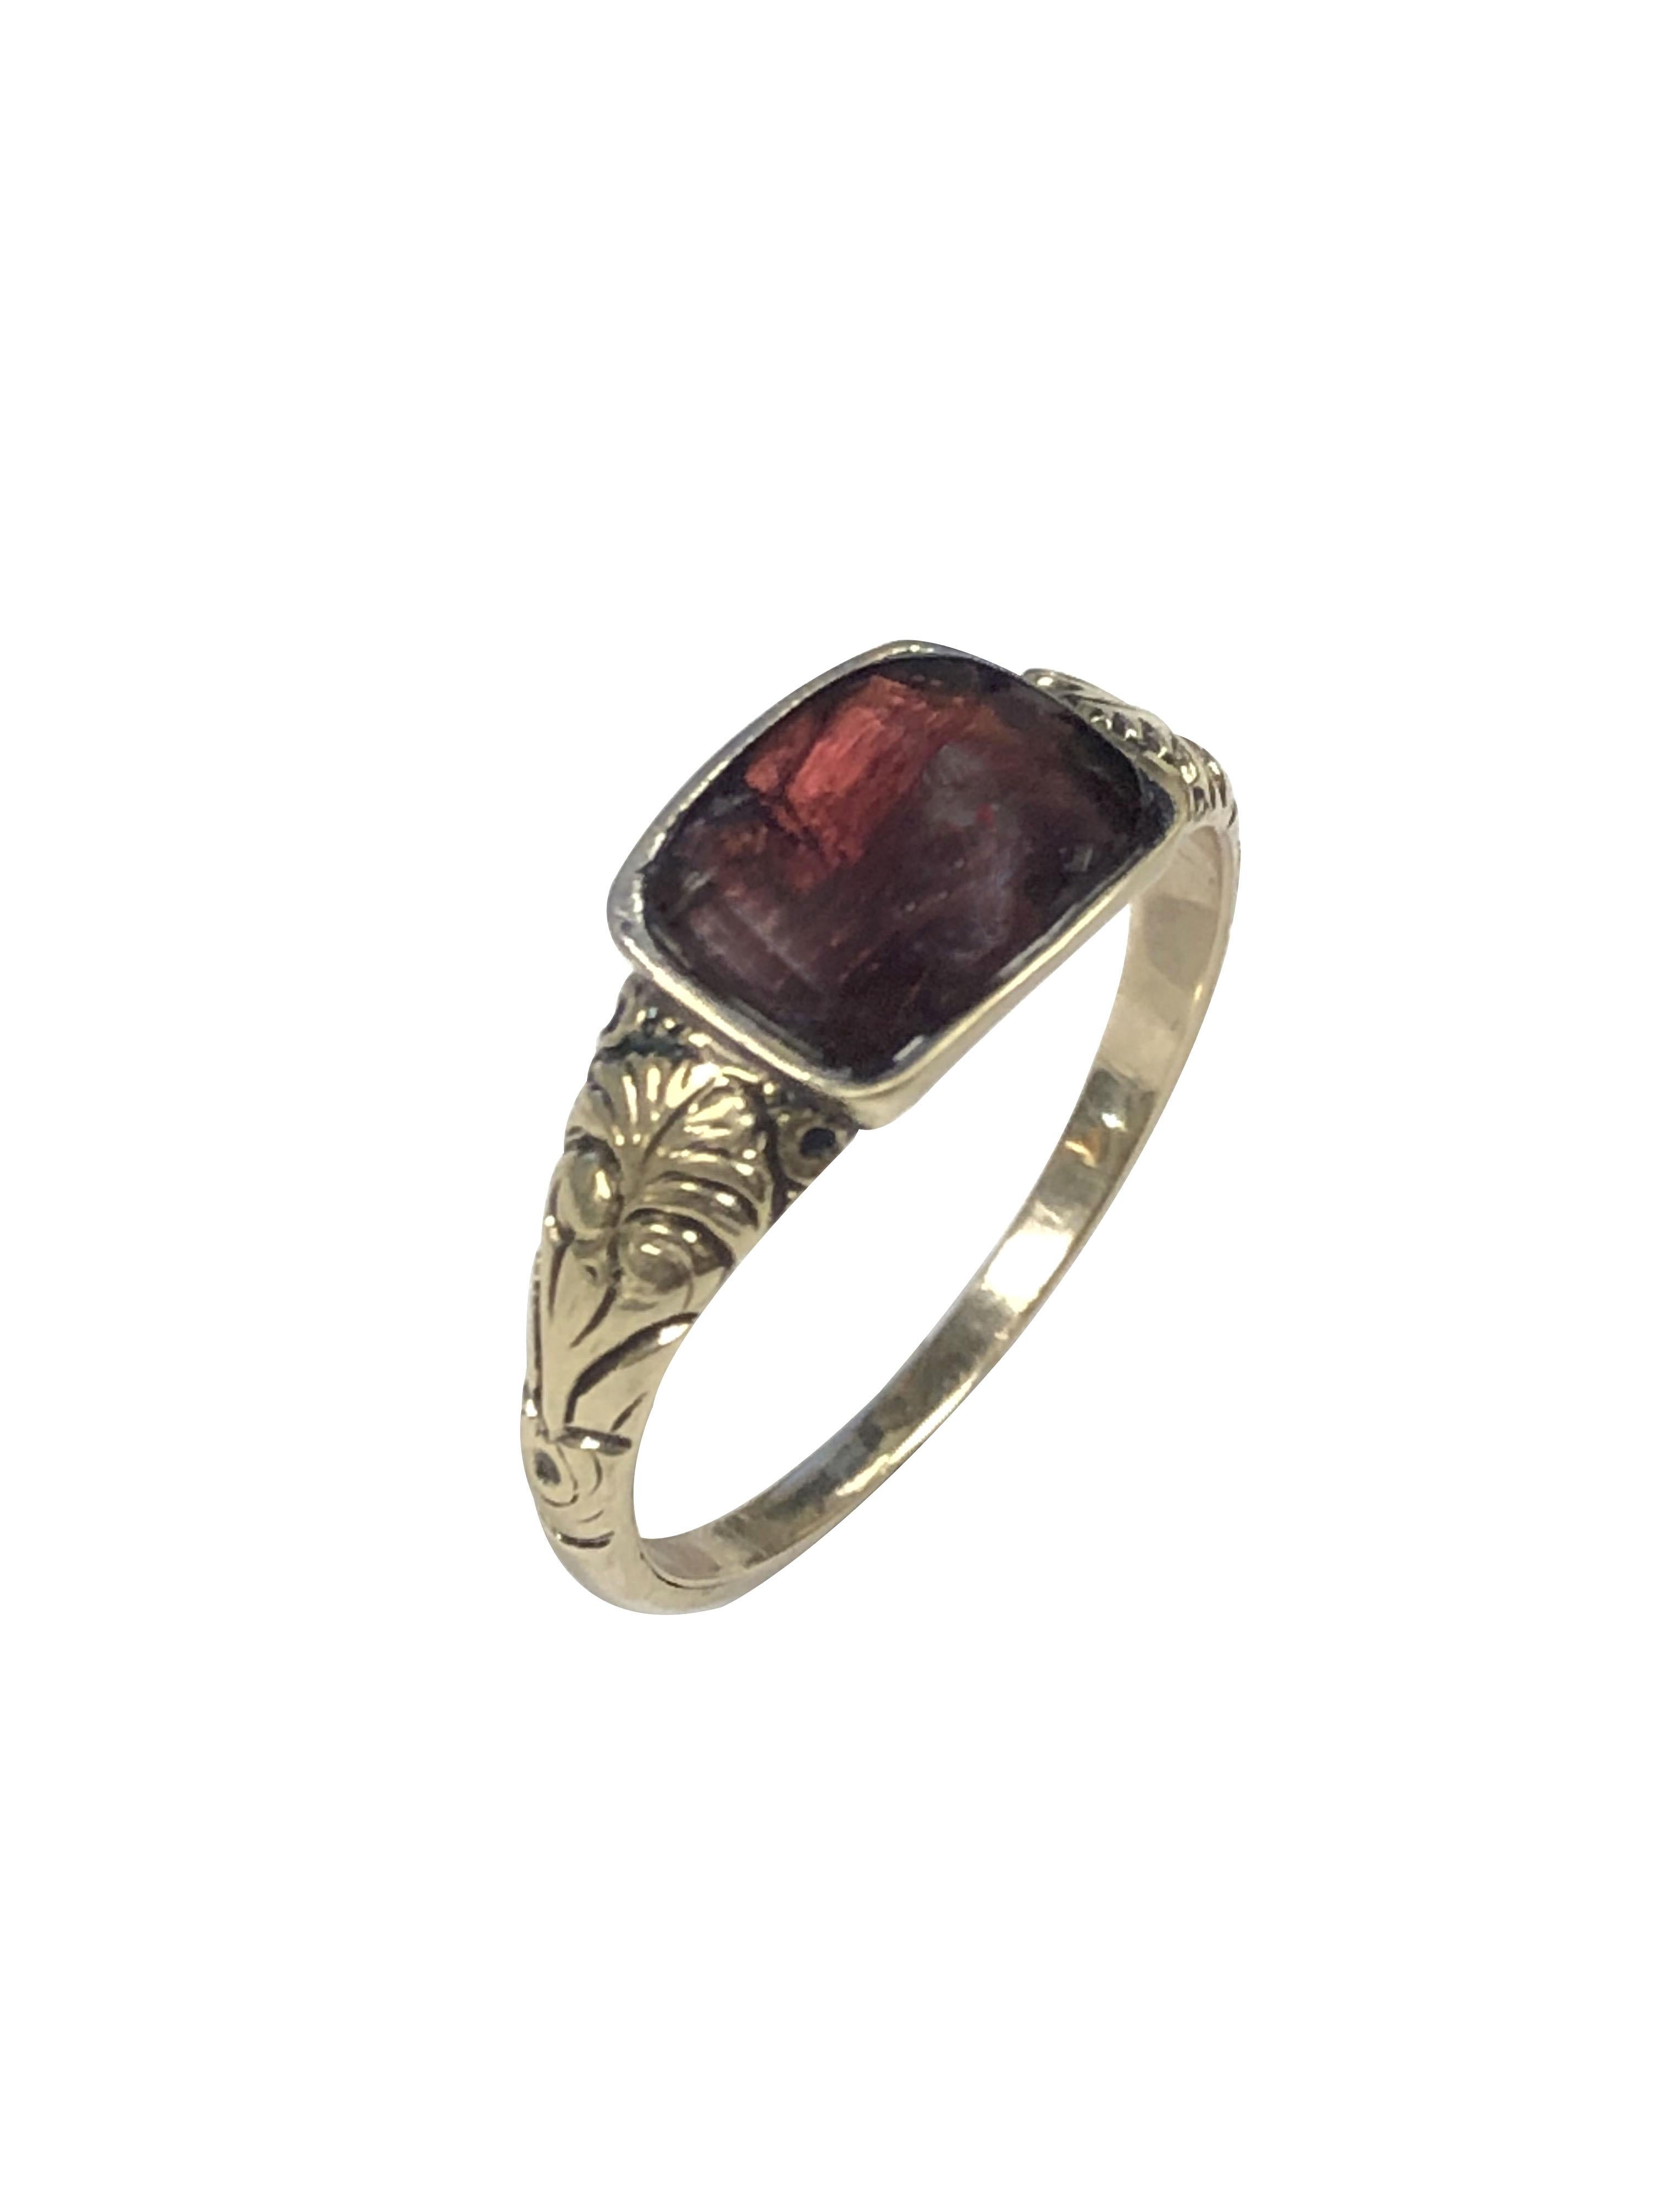 A Georgian Era ring in 14k Yellow Gold, set with a Cabochon Garnet, the top of the ring measures 1/2 x 5/16 inch. chased design work on the sides, finger size 6 1/2, incredible condition for a piece of this age, most likely a keepsake that was